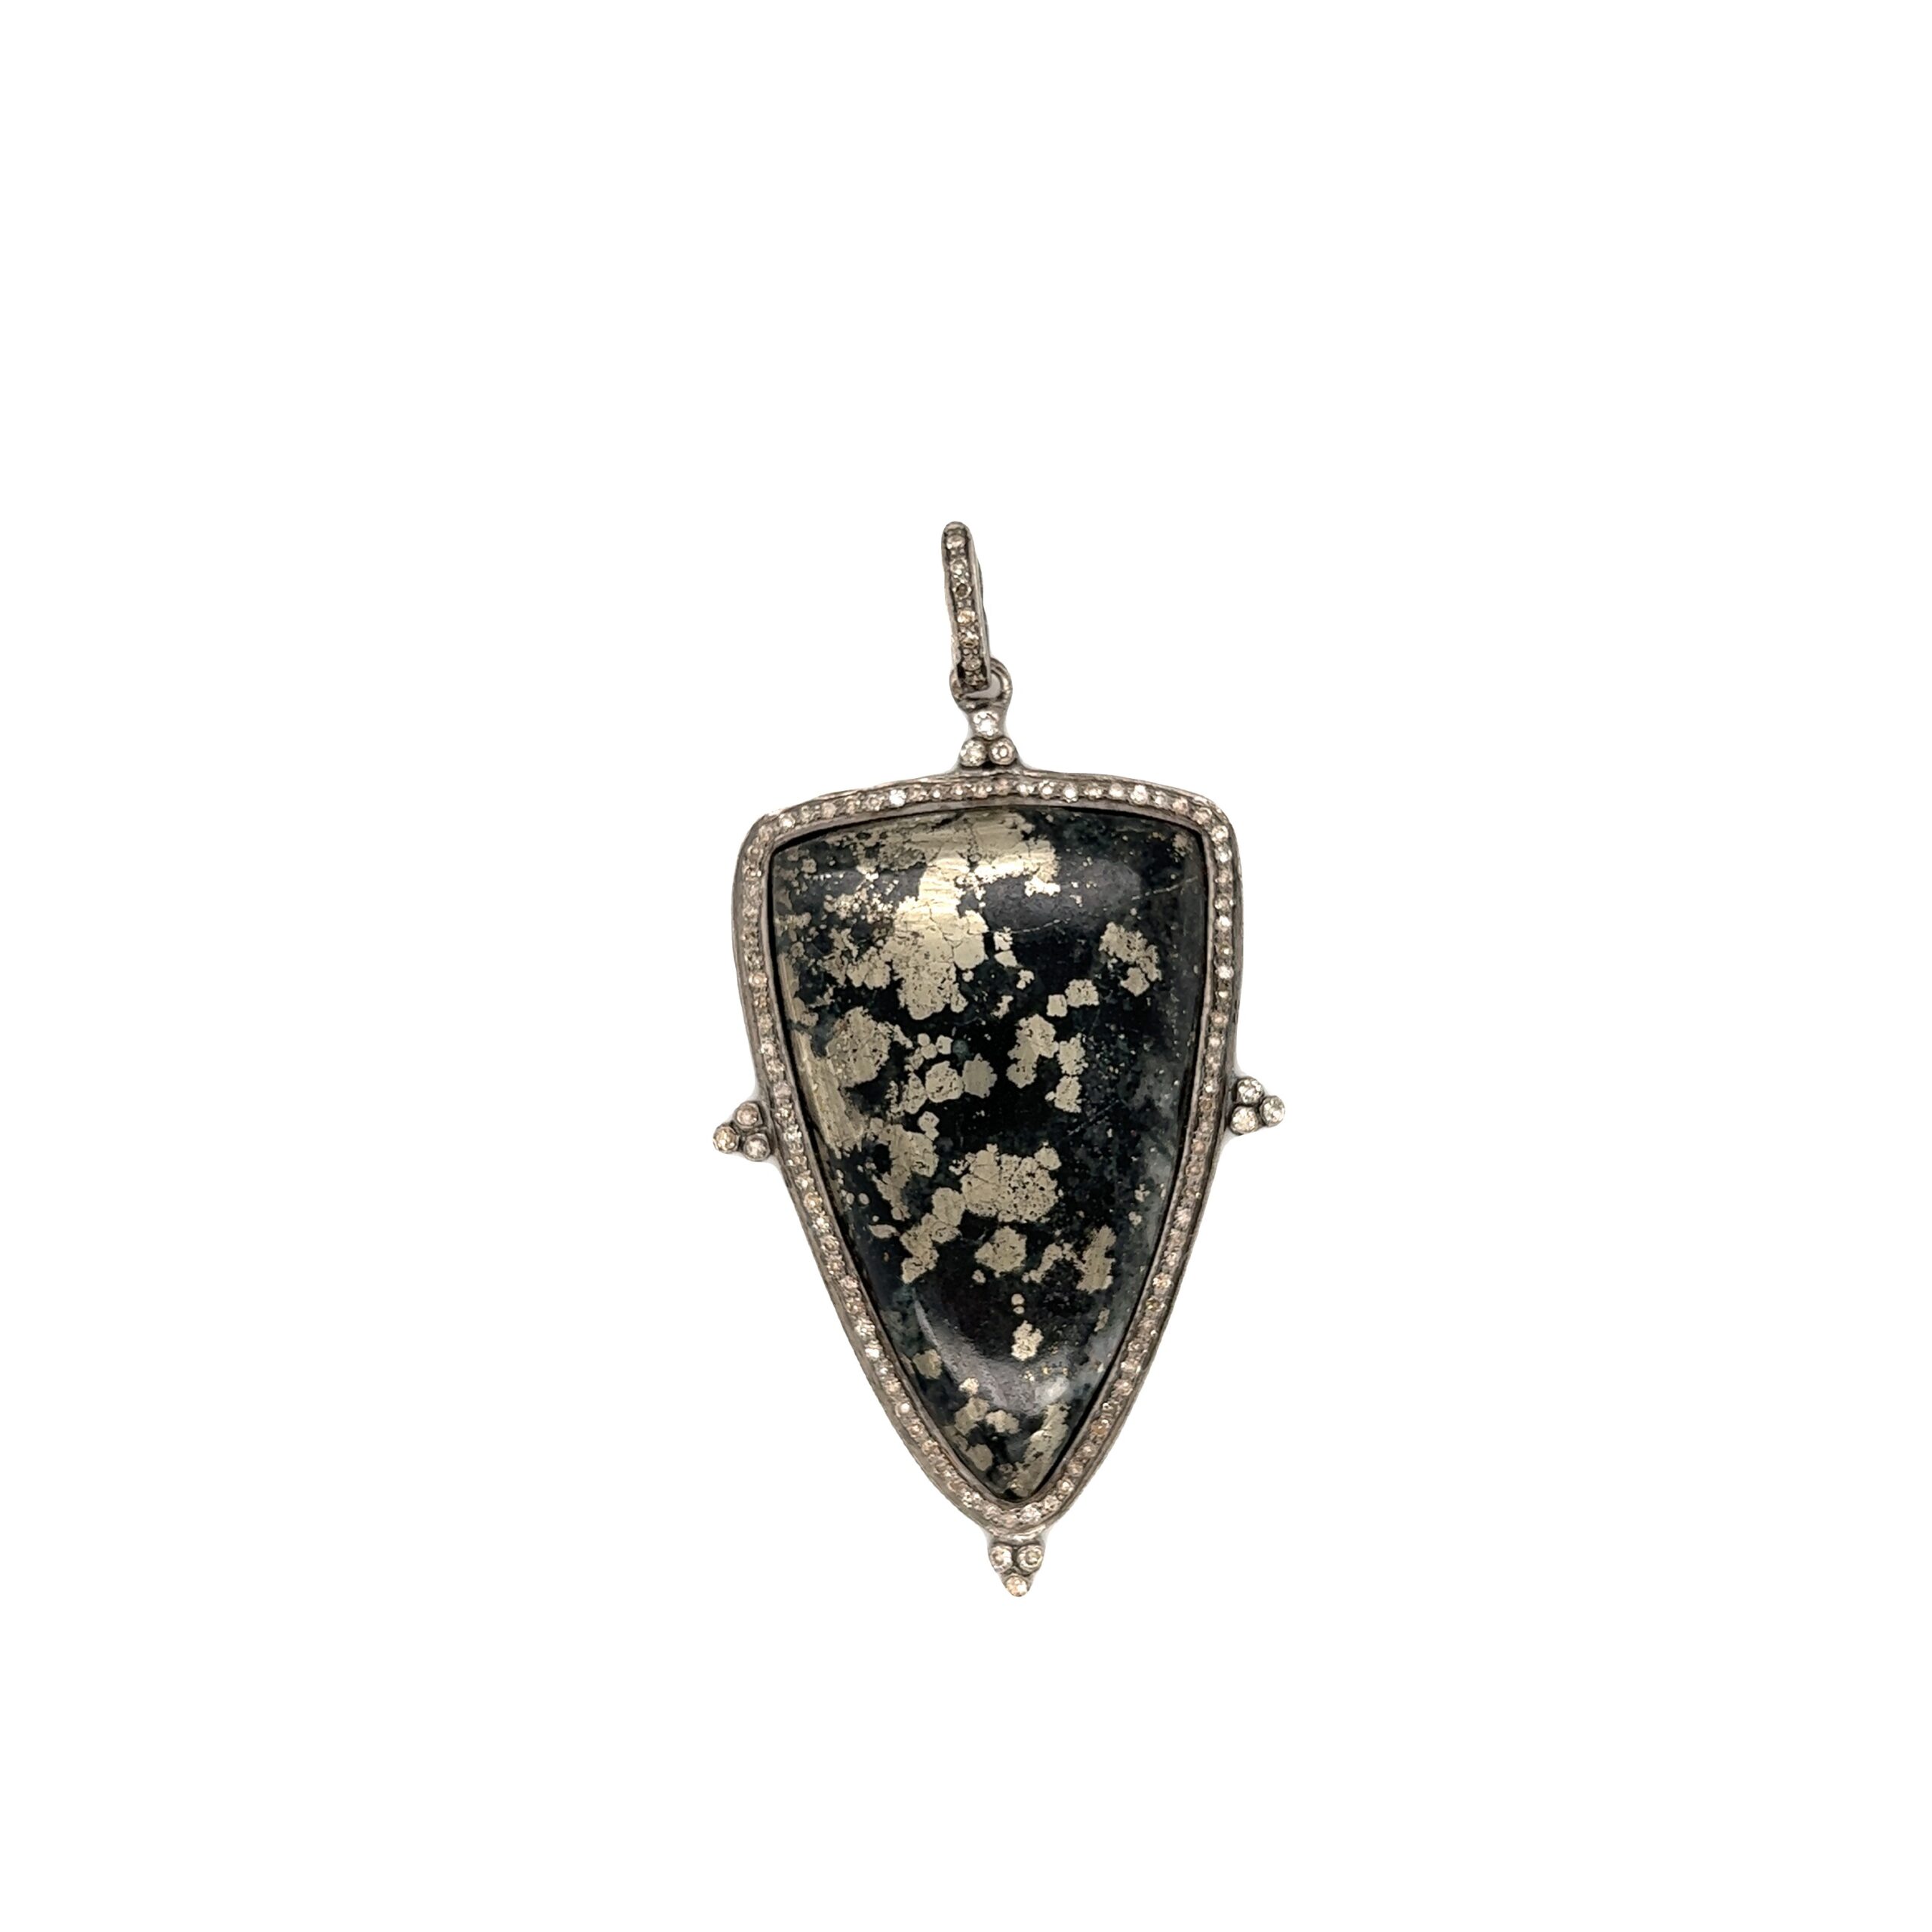 Featured image for “Diamond Embellished Pyrite Pendant”